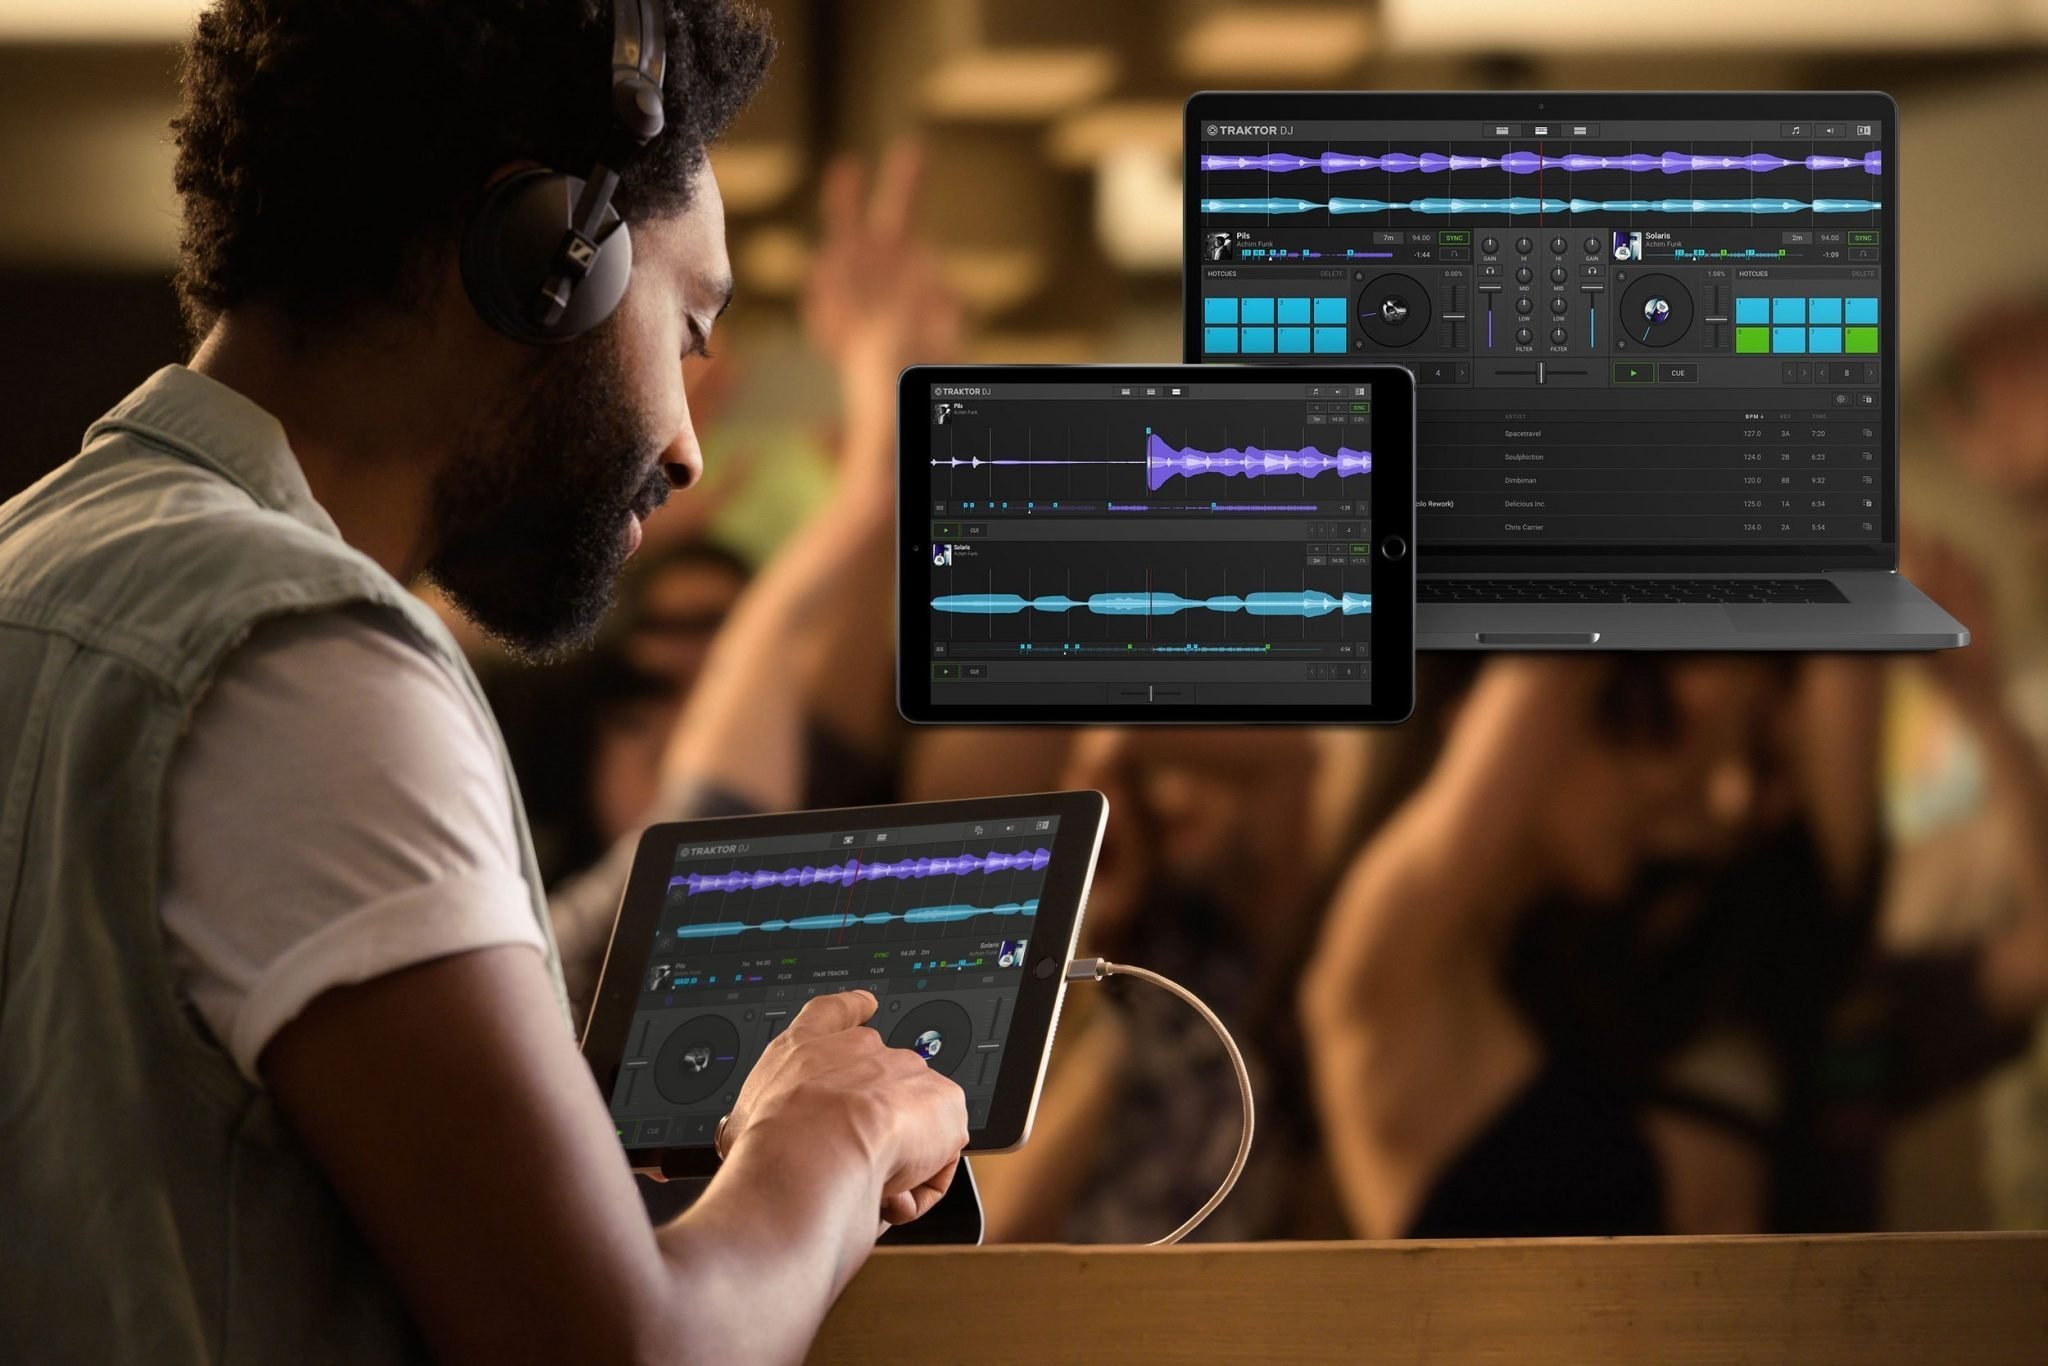 NAMM 2019: So about that new version of Traktor... 7